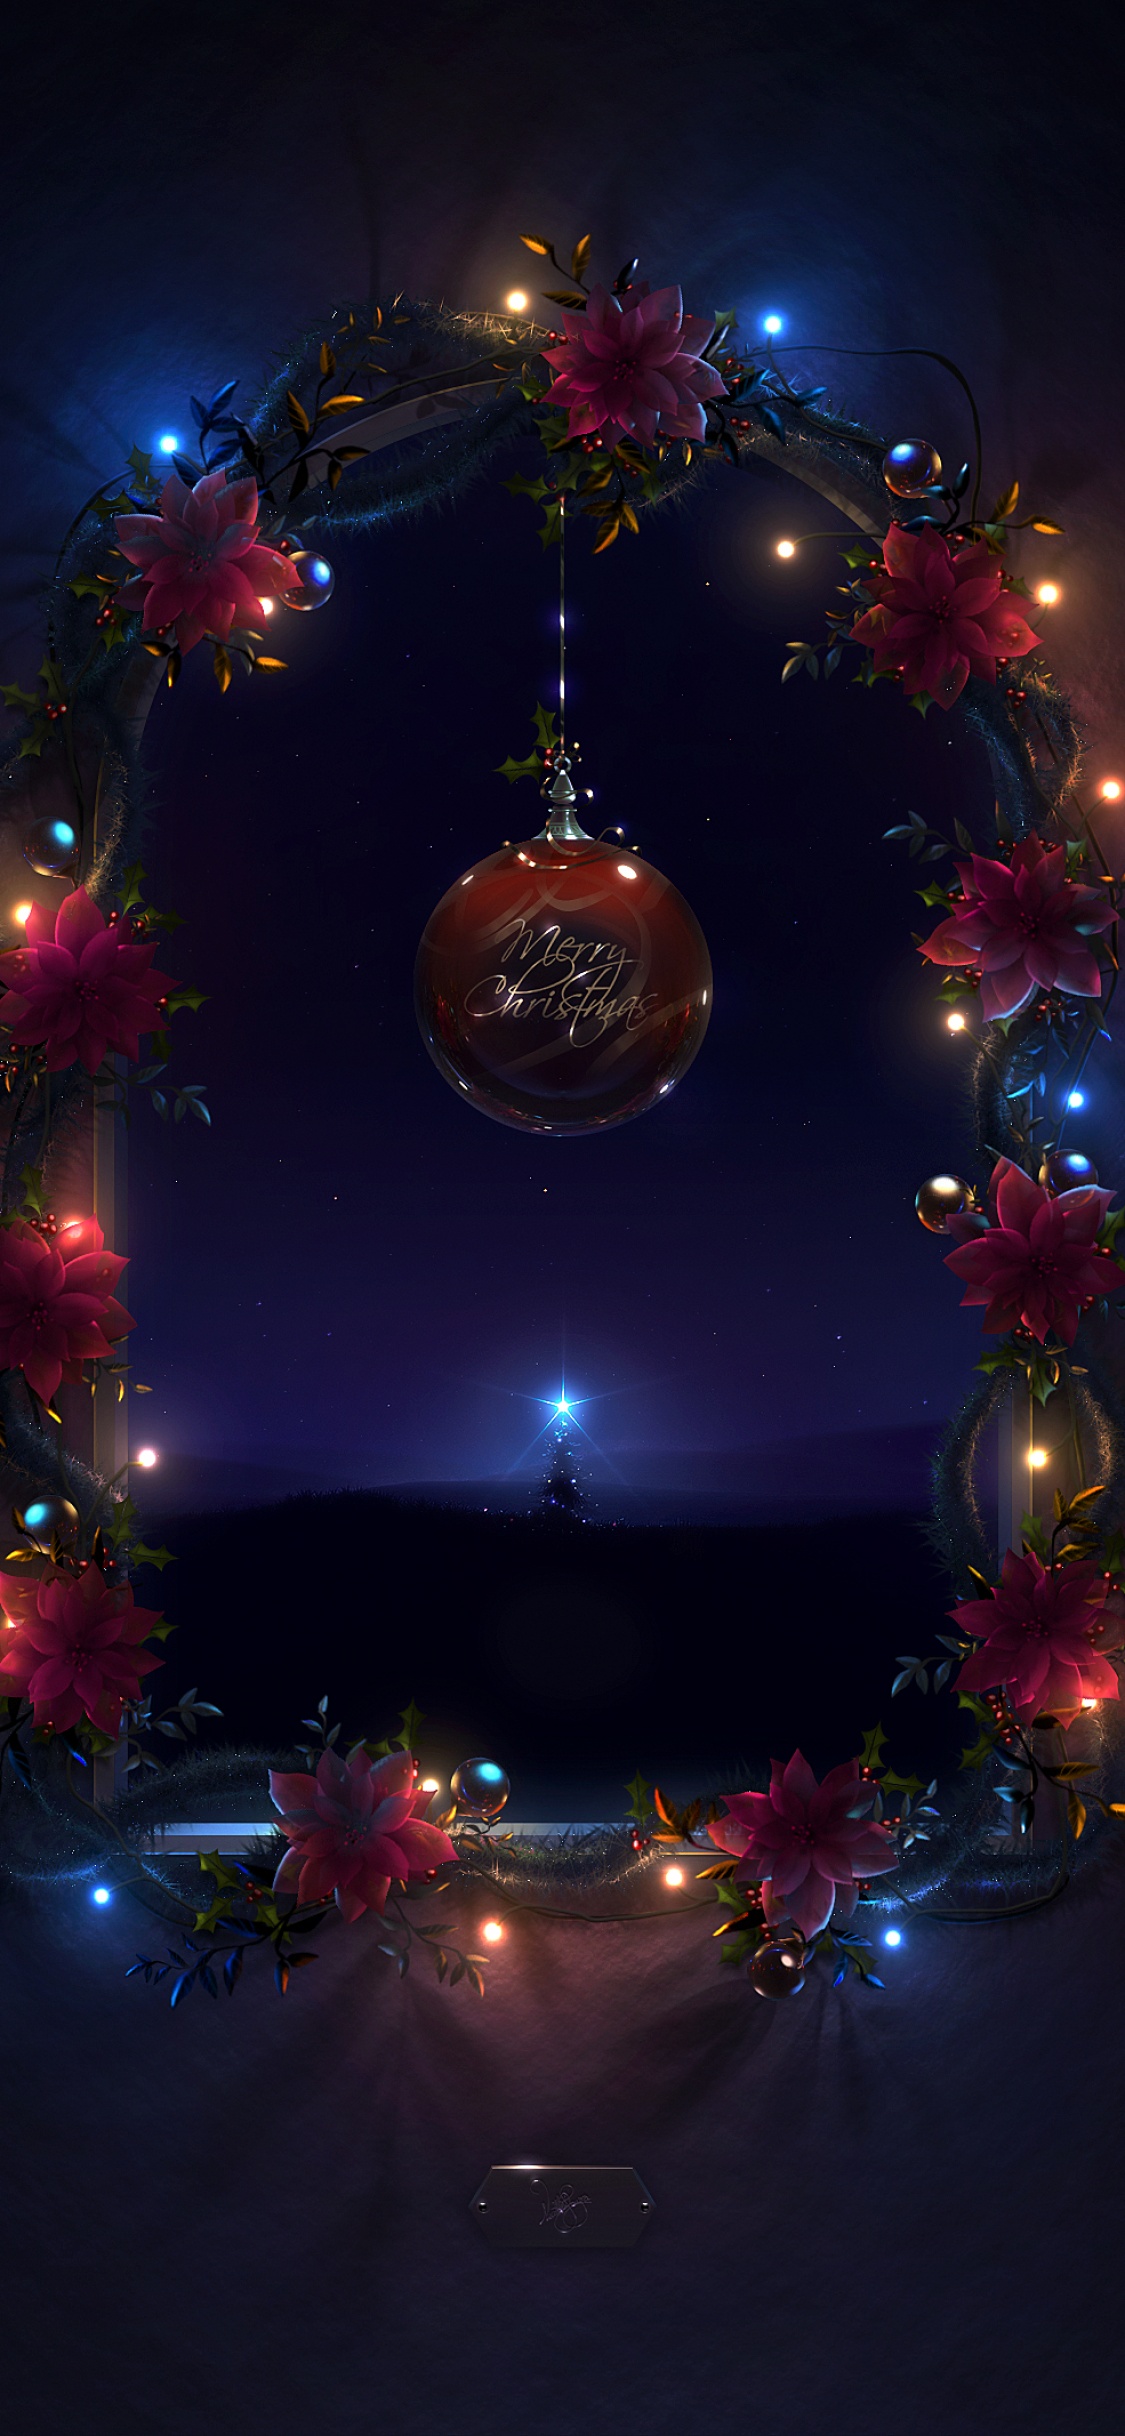 Night Scene Merry Christmas Background Wallpaper Image For Free Download   Pngtree